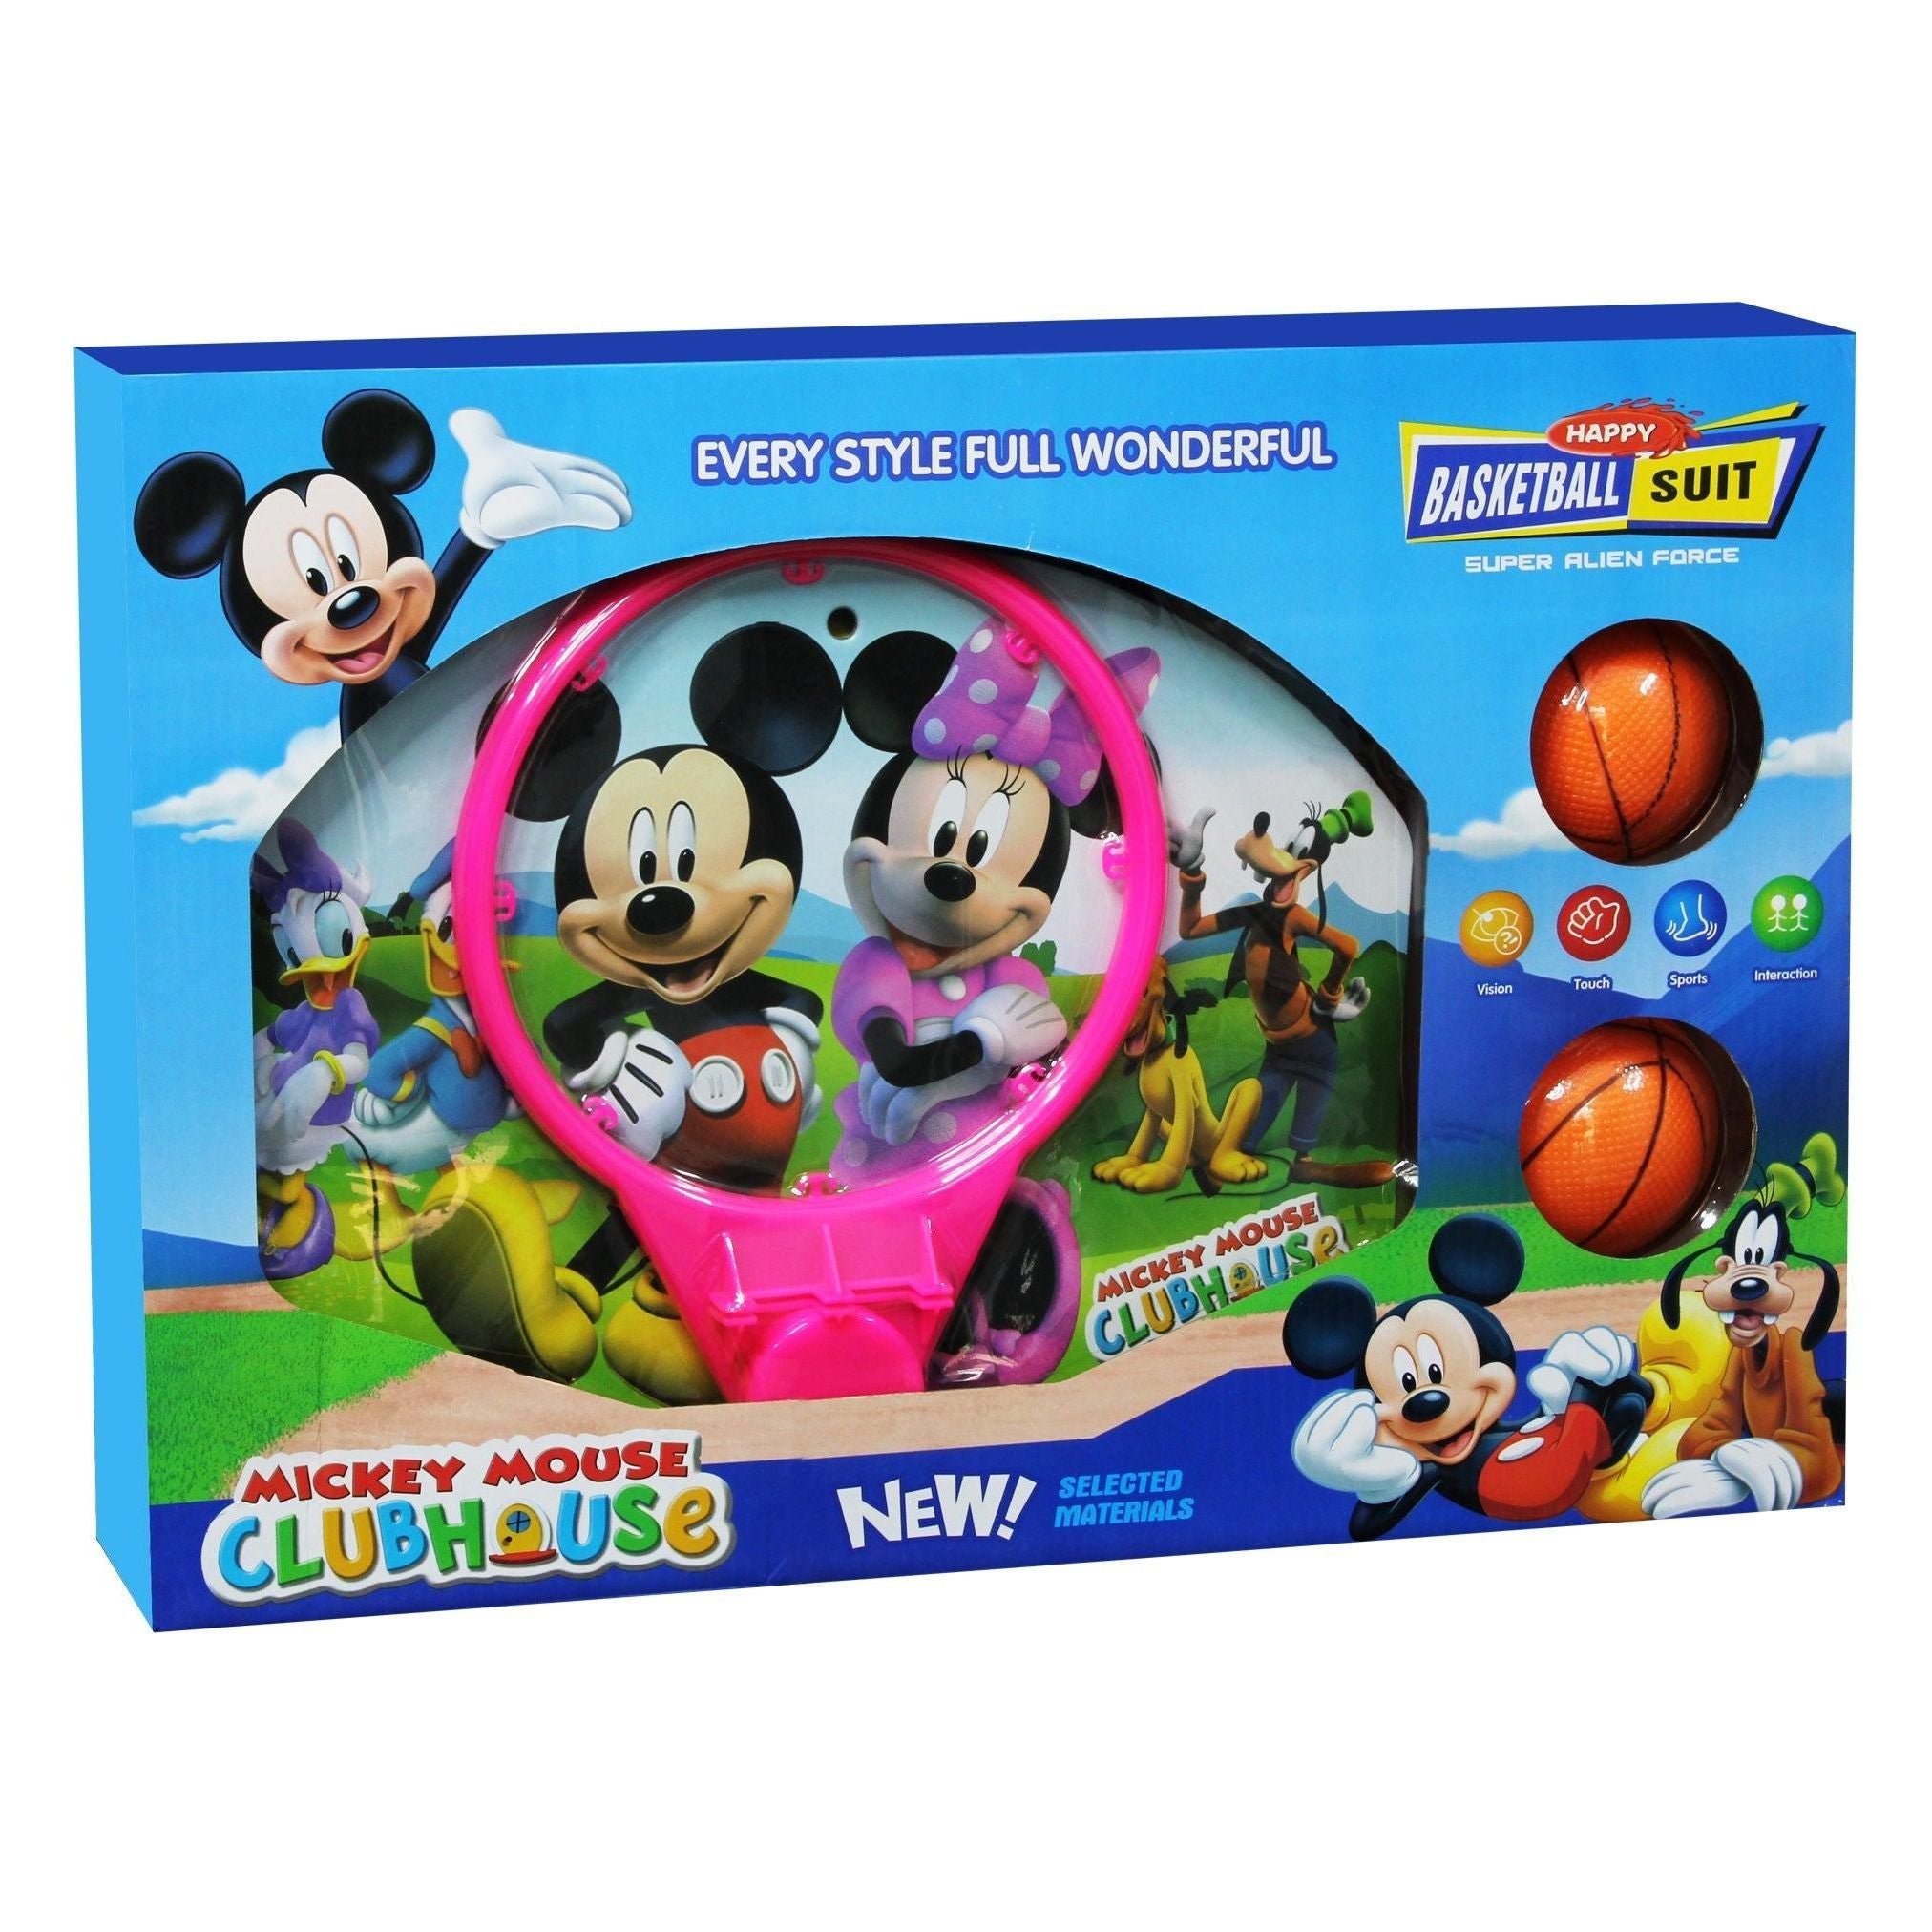 Mickey Mouse Happy Basketball Suit Play Set For Kids - BumbleToys - 4+ Years, 5-7 Years, Basketball, Boys, Girls, Kids Sports & Balls, Mickey Mouse, Toy House